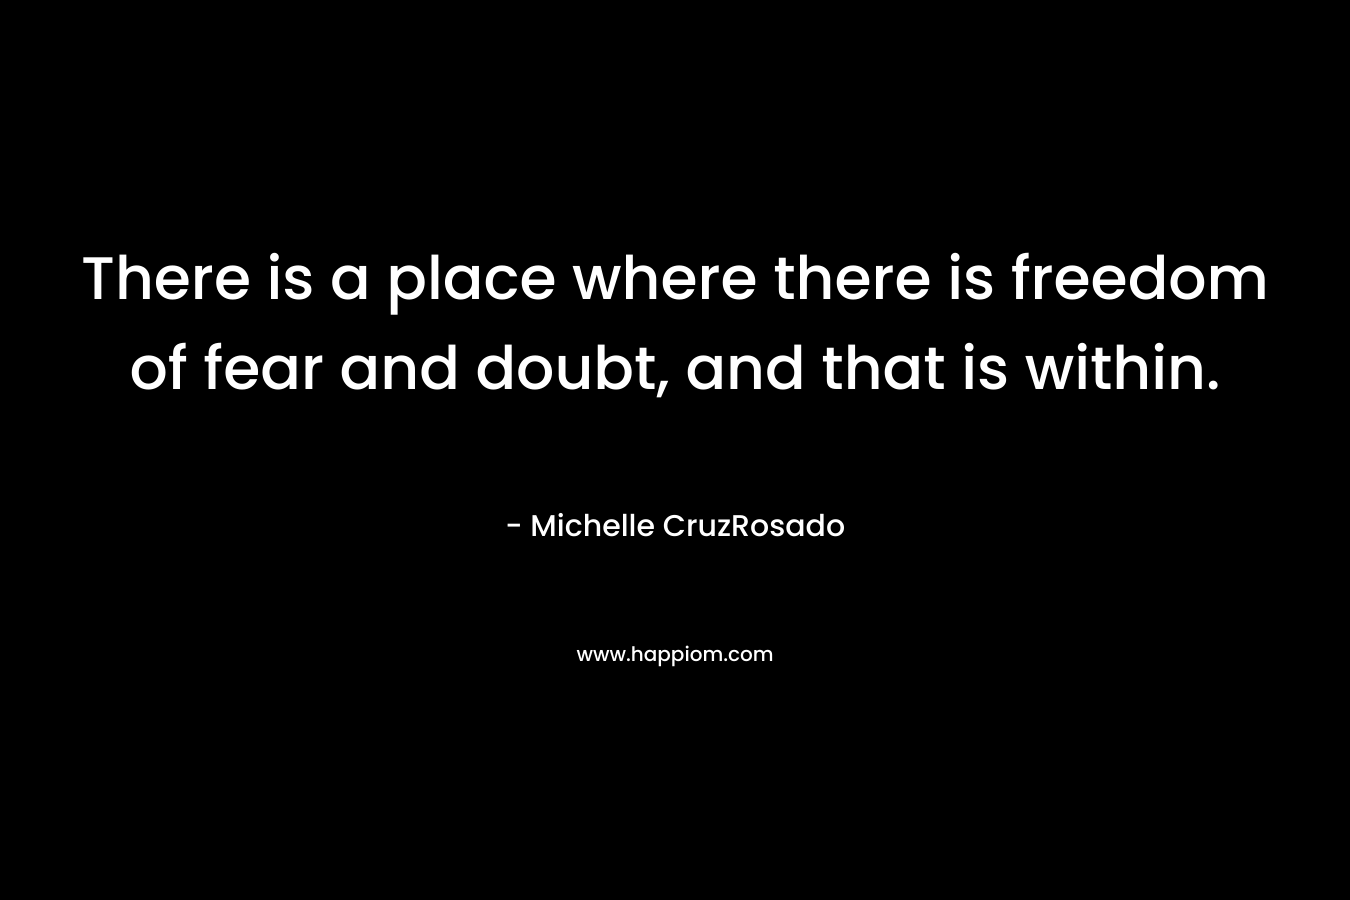 There is a place where there is freedom of fear and doubt, and that is within.